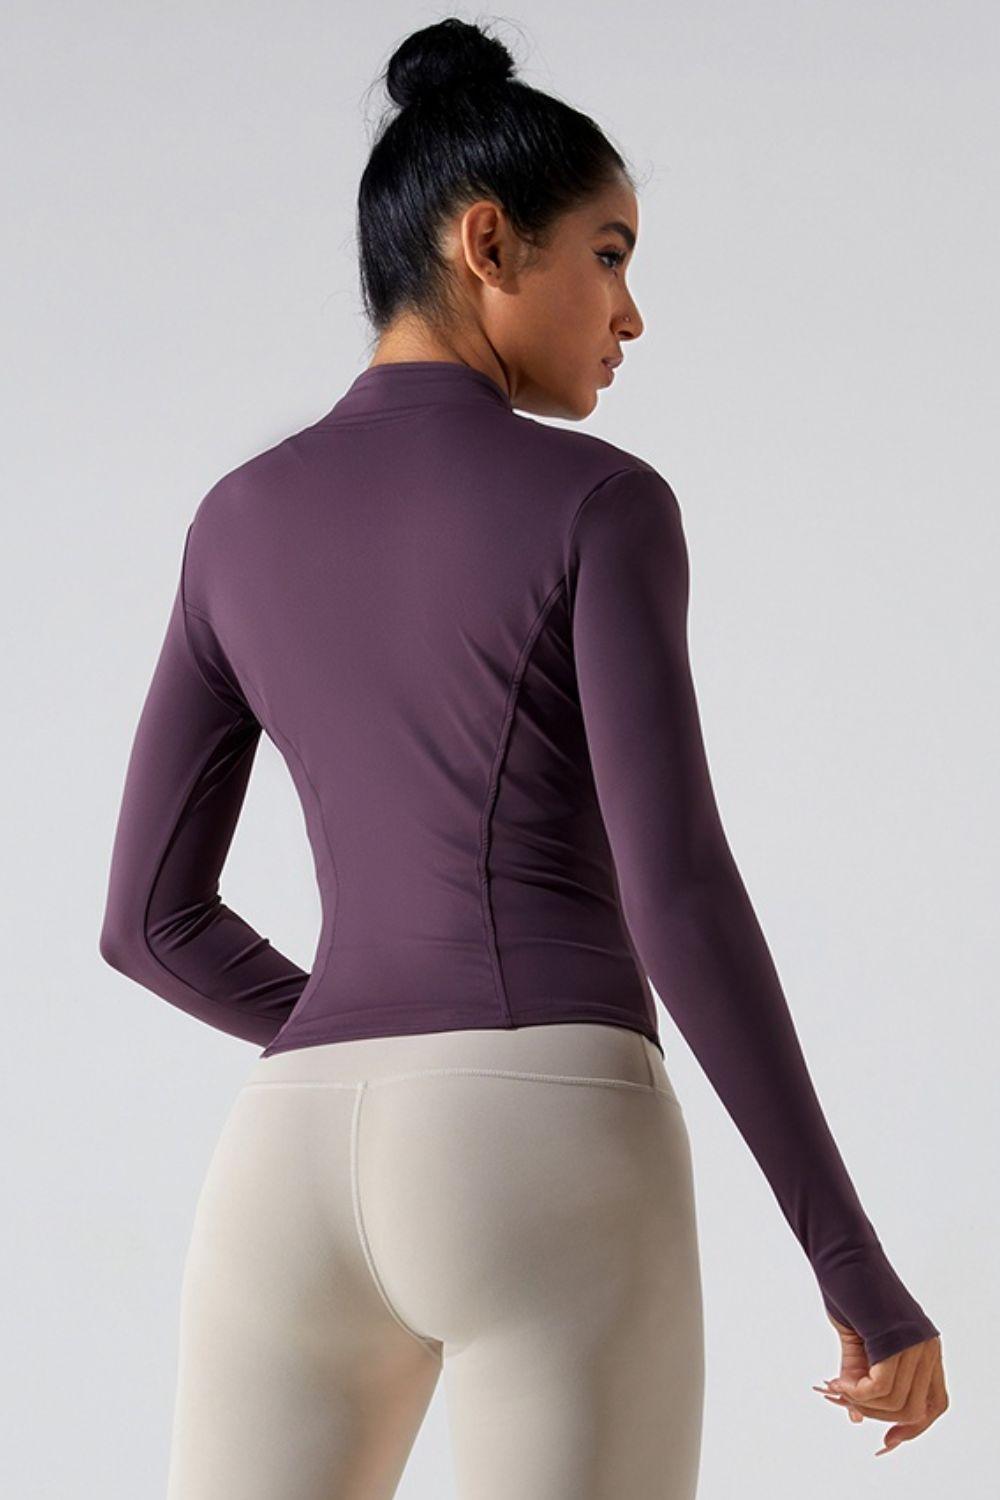 a woman in tight pants and a purple top